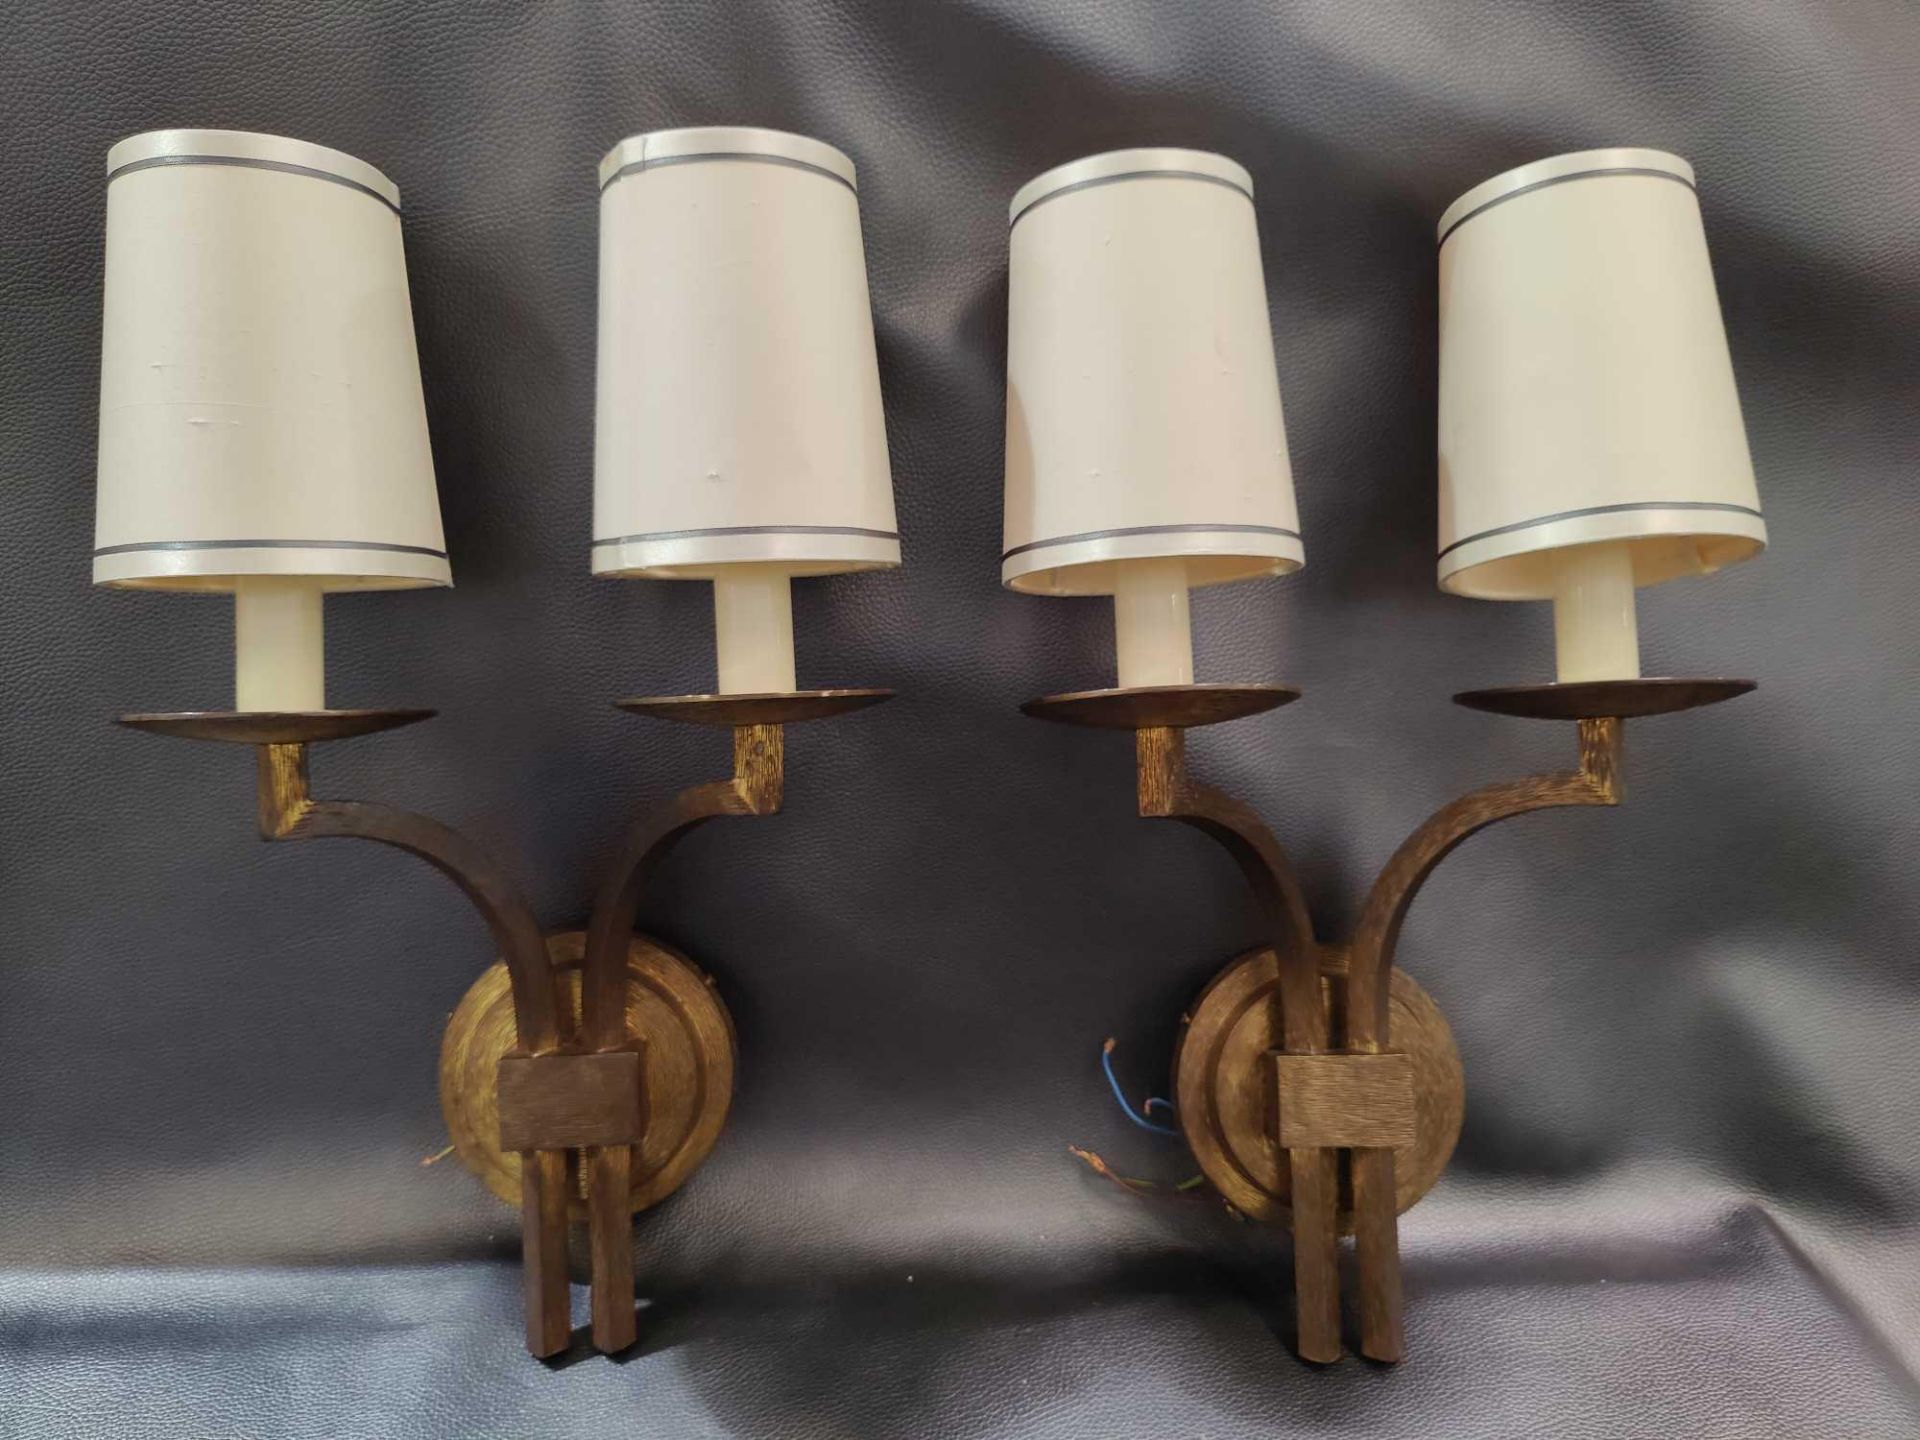 A Pair Of Dernier And Hamlyn Twin Arm Antique Bronzed Wall Sconces With Shade 51cm